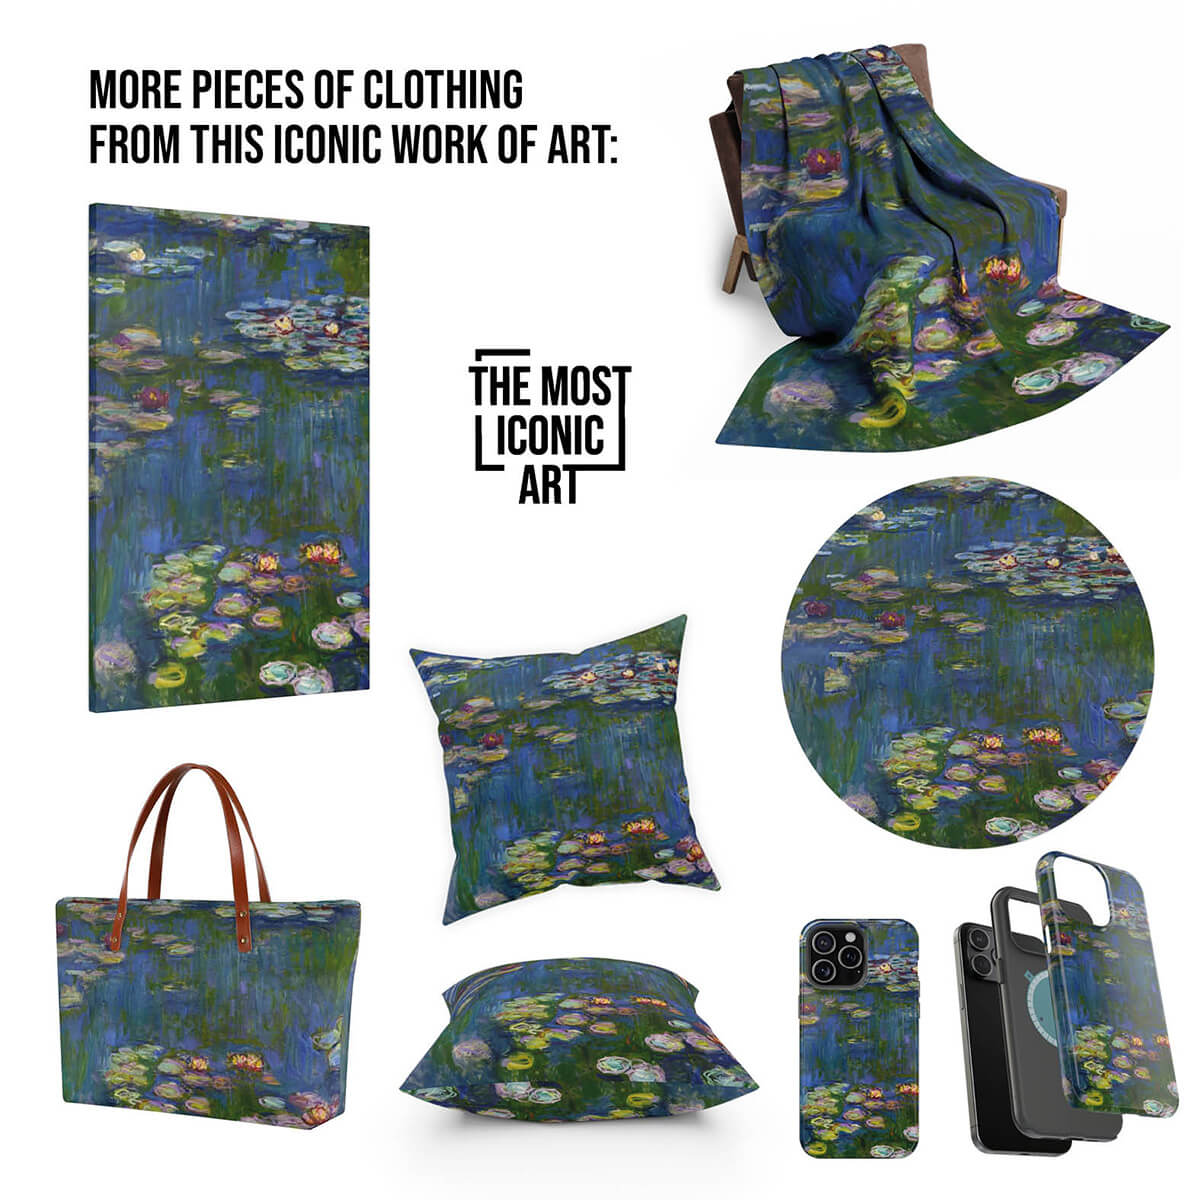 Soft and comfortable fabric adorned with water lilies